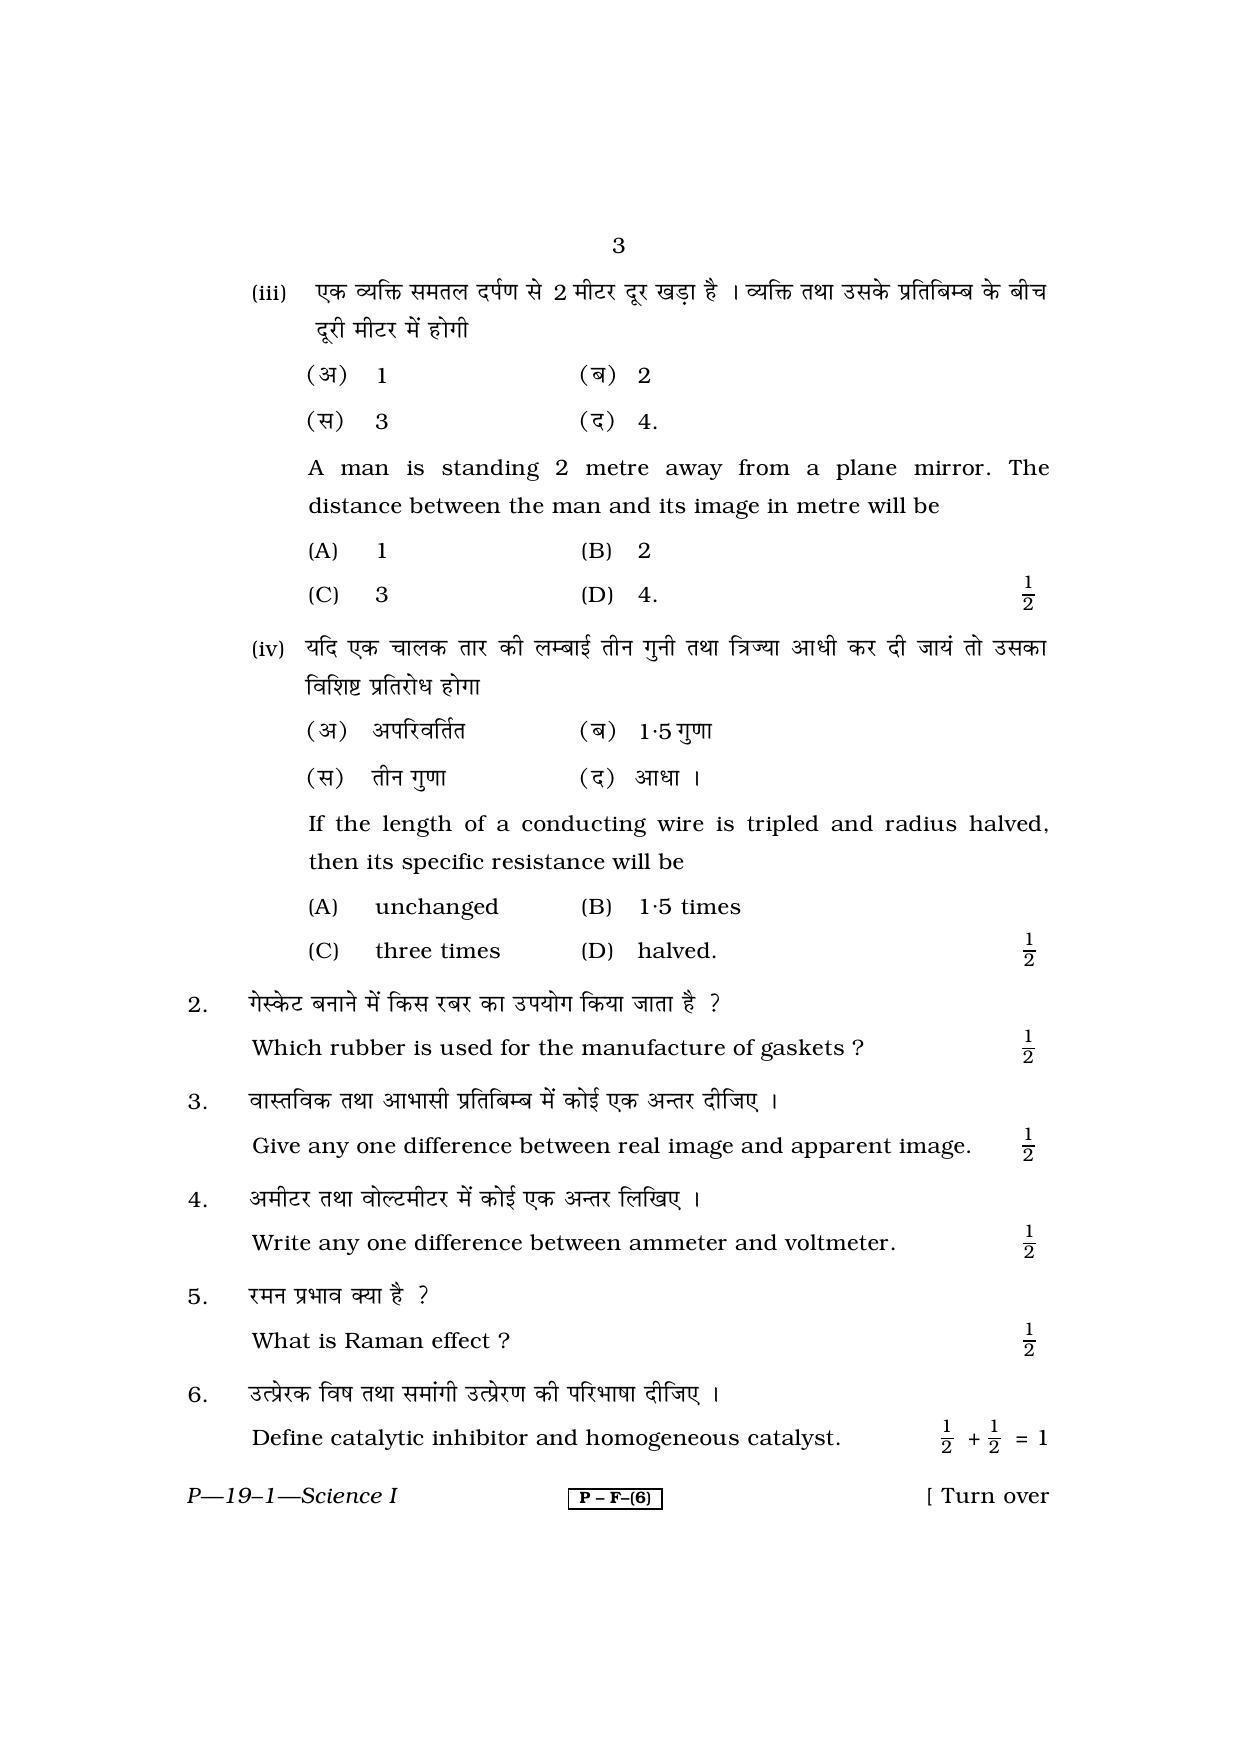 RBSE 2011 Science Praveshika Question Paper - Page 3